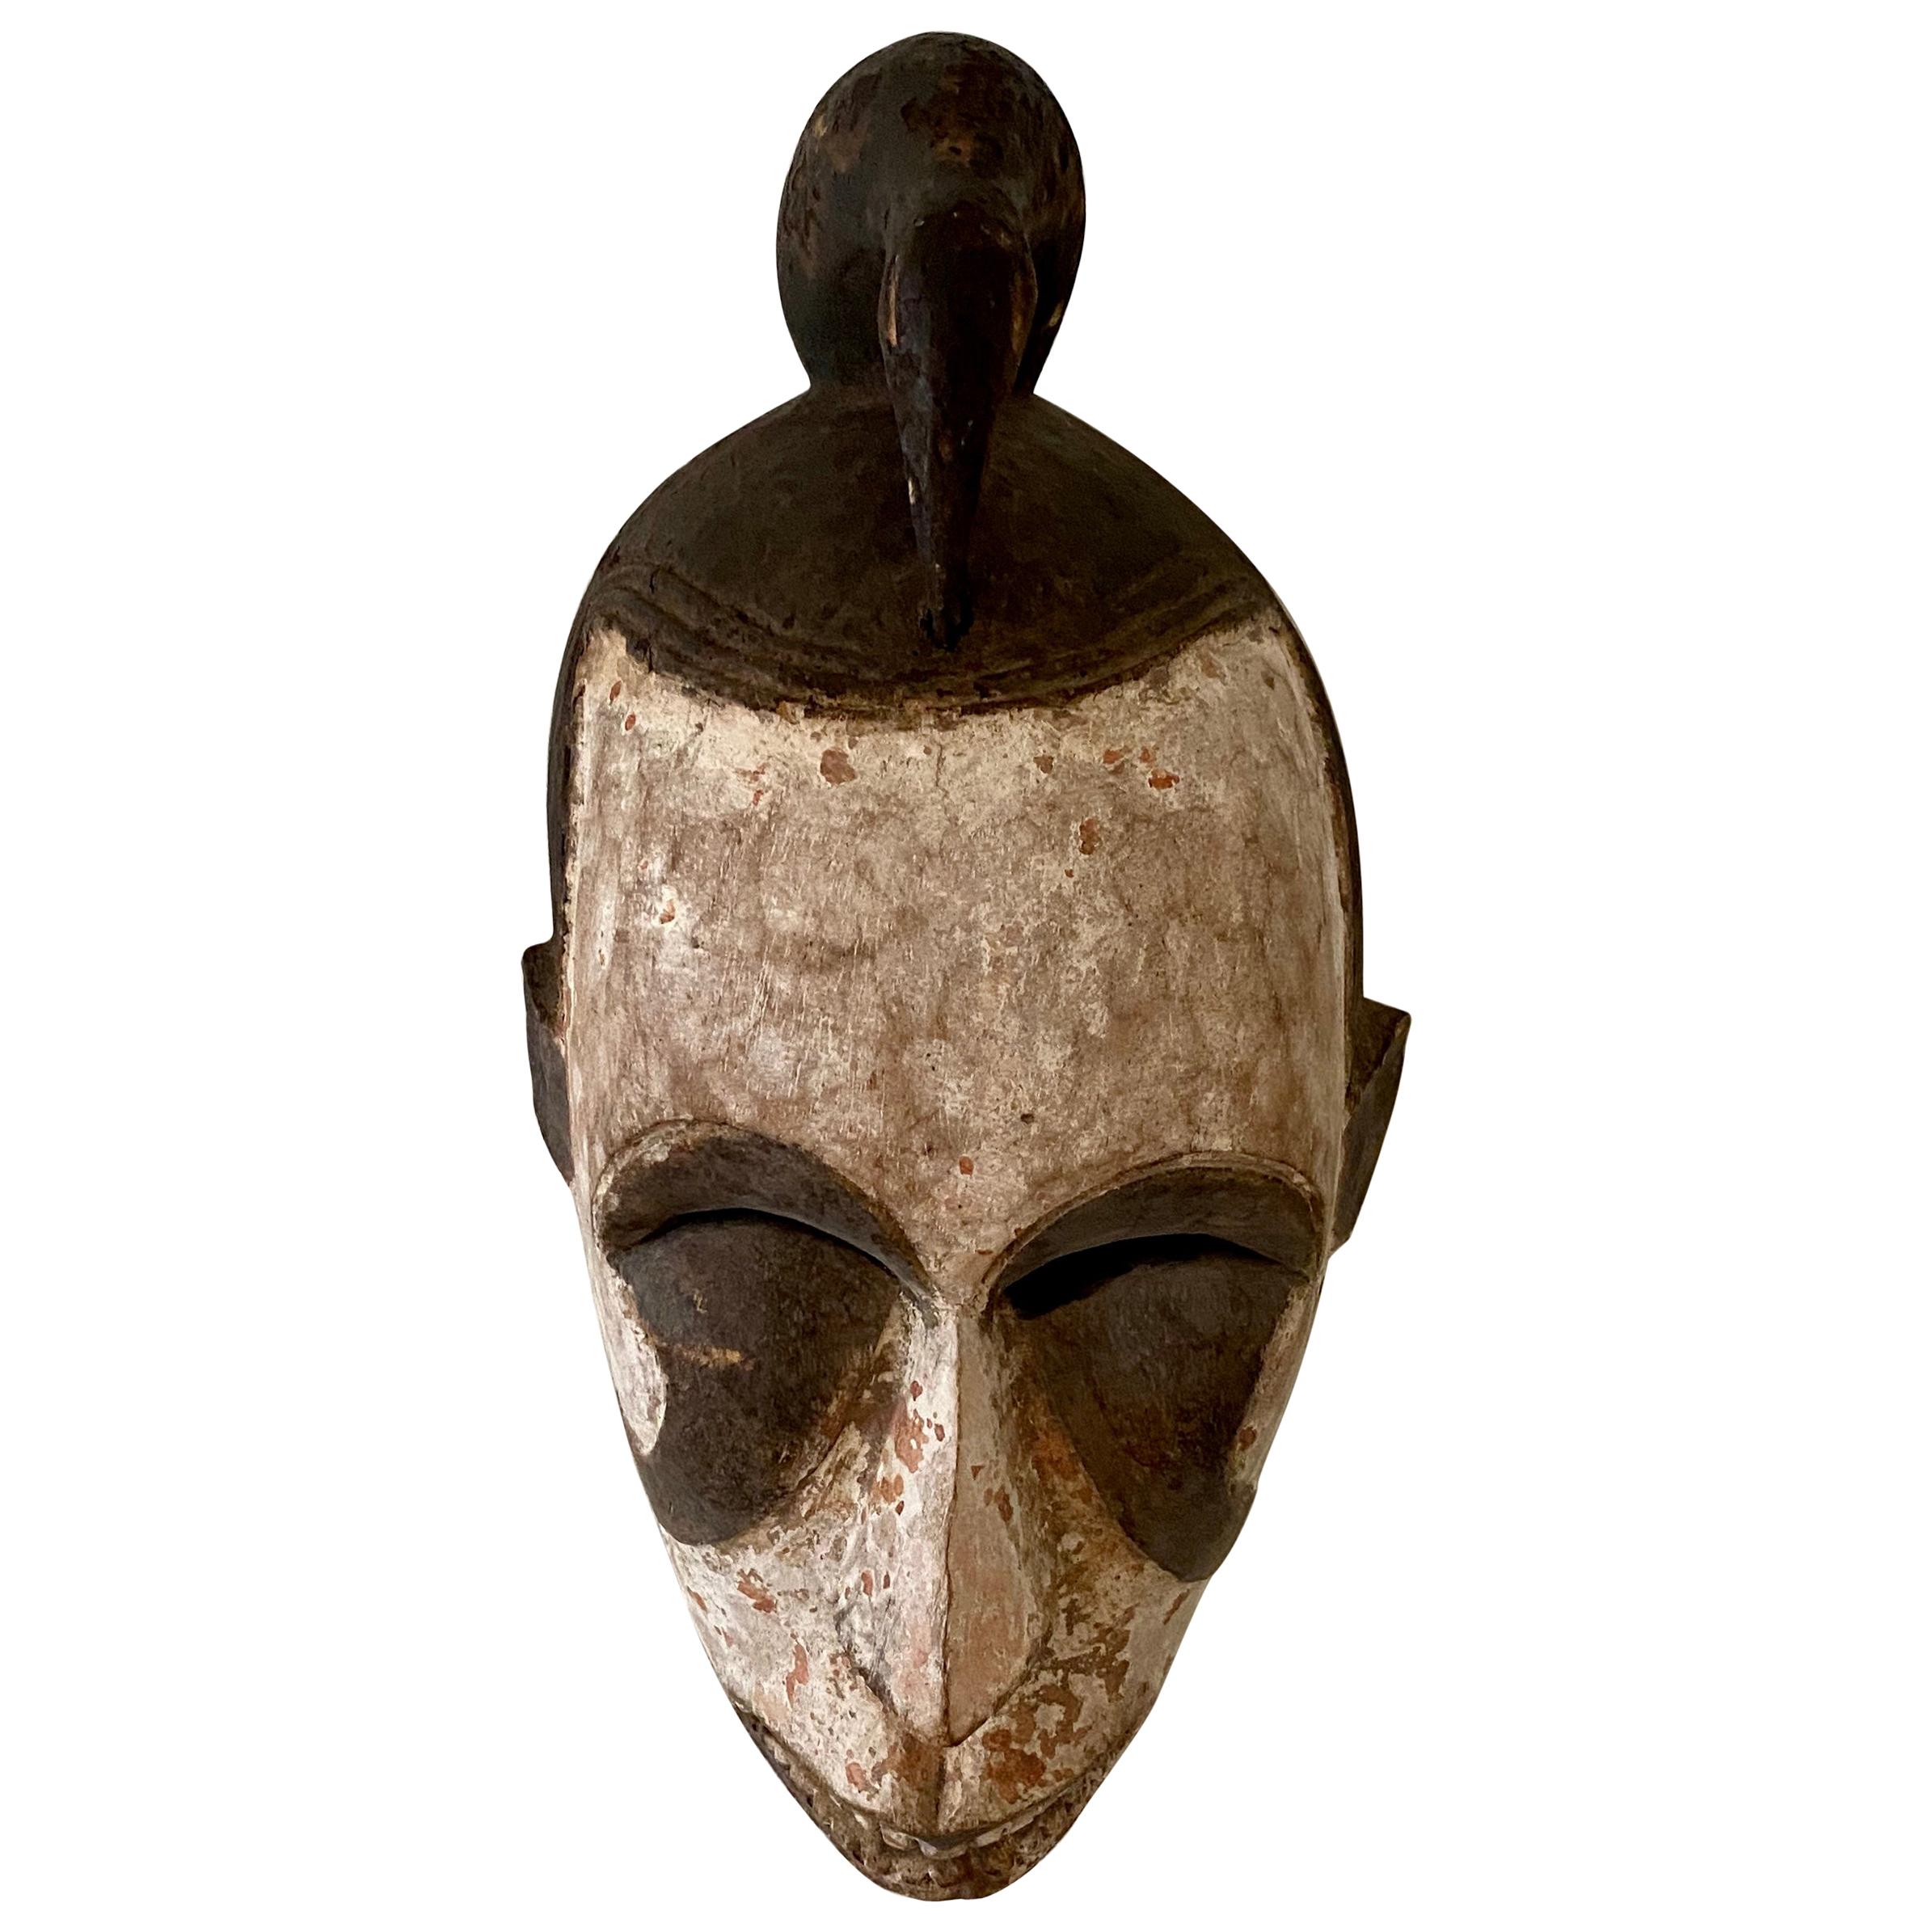 Midcentury African Kpelie Mask Senufo Tribe Ivory Cost with a Calao Bird, 1950